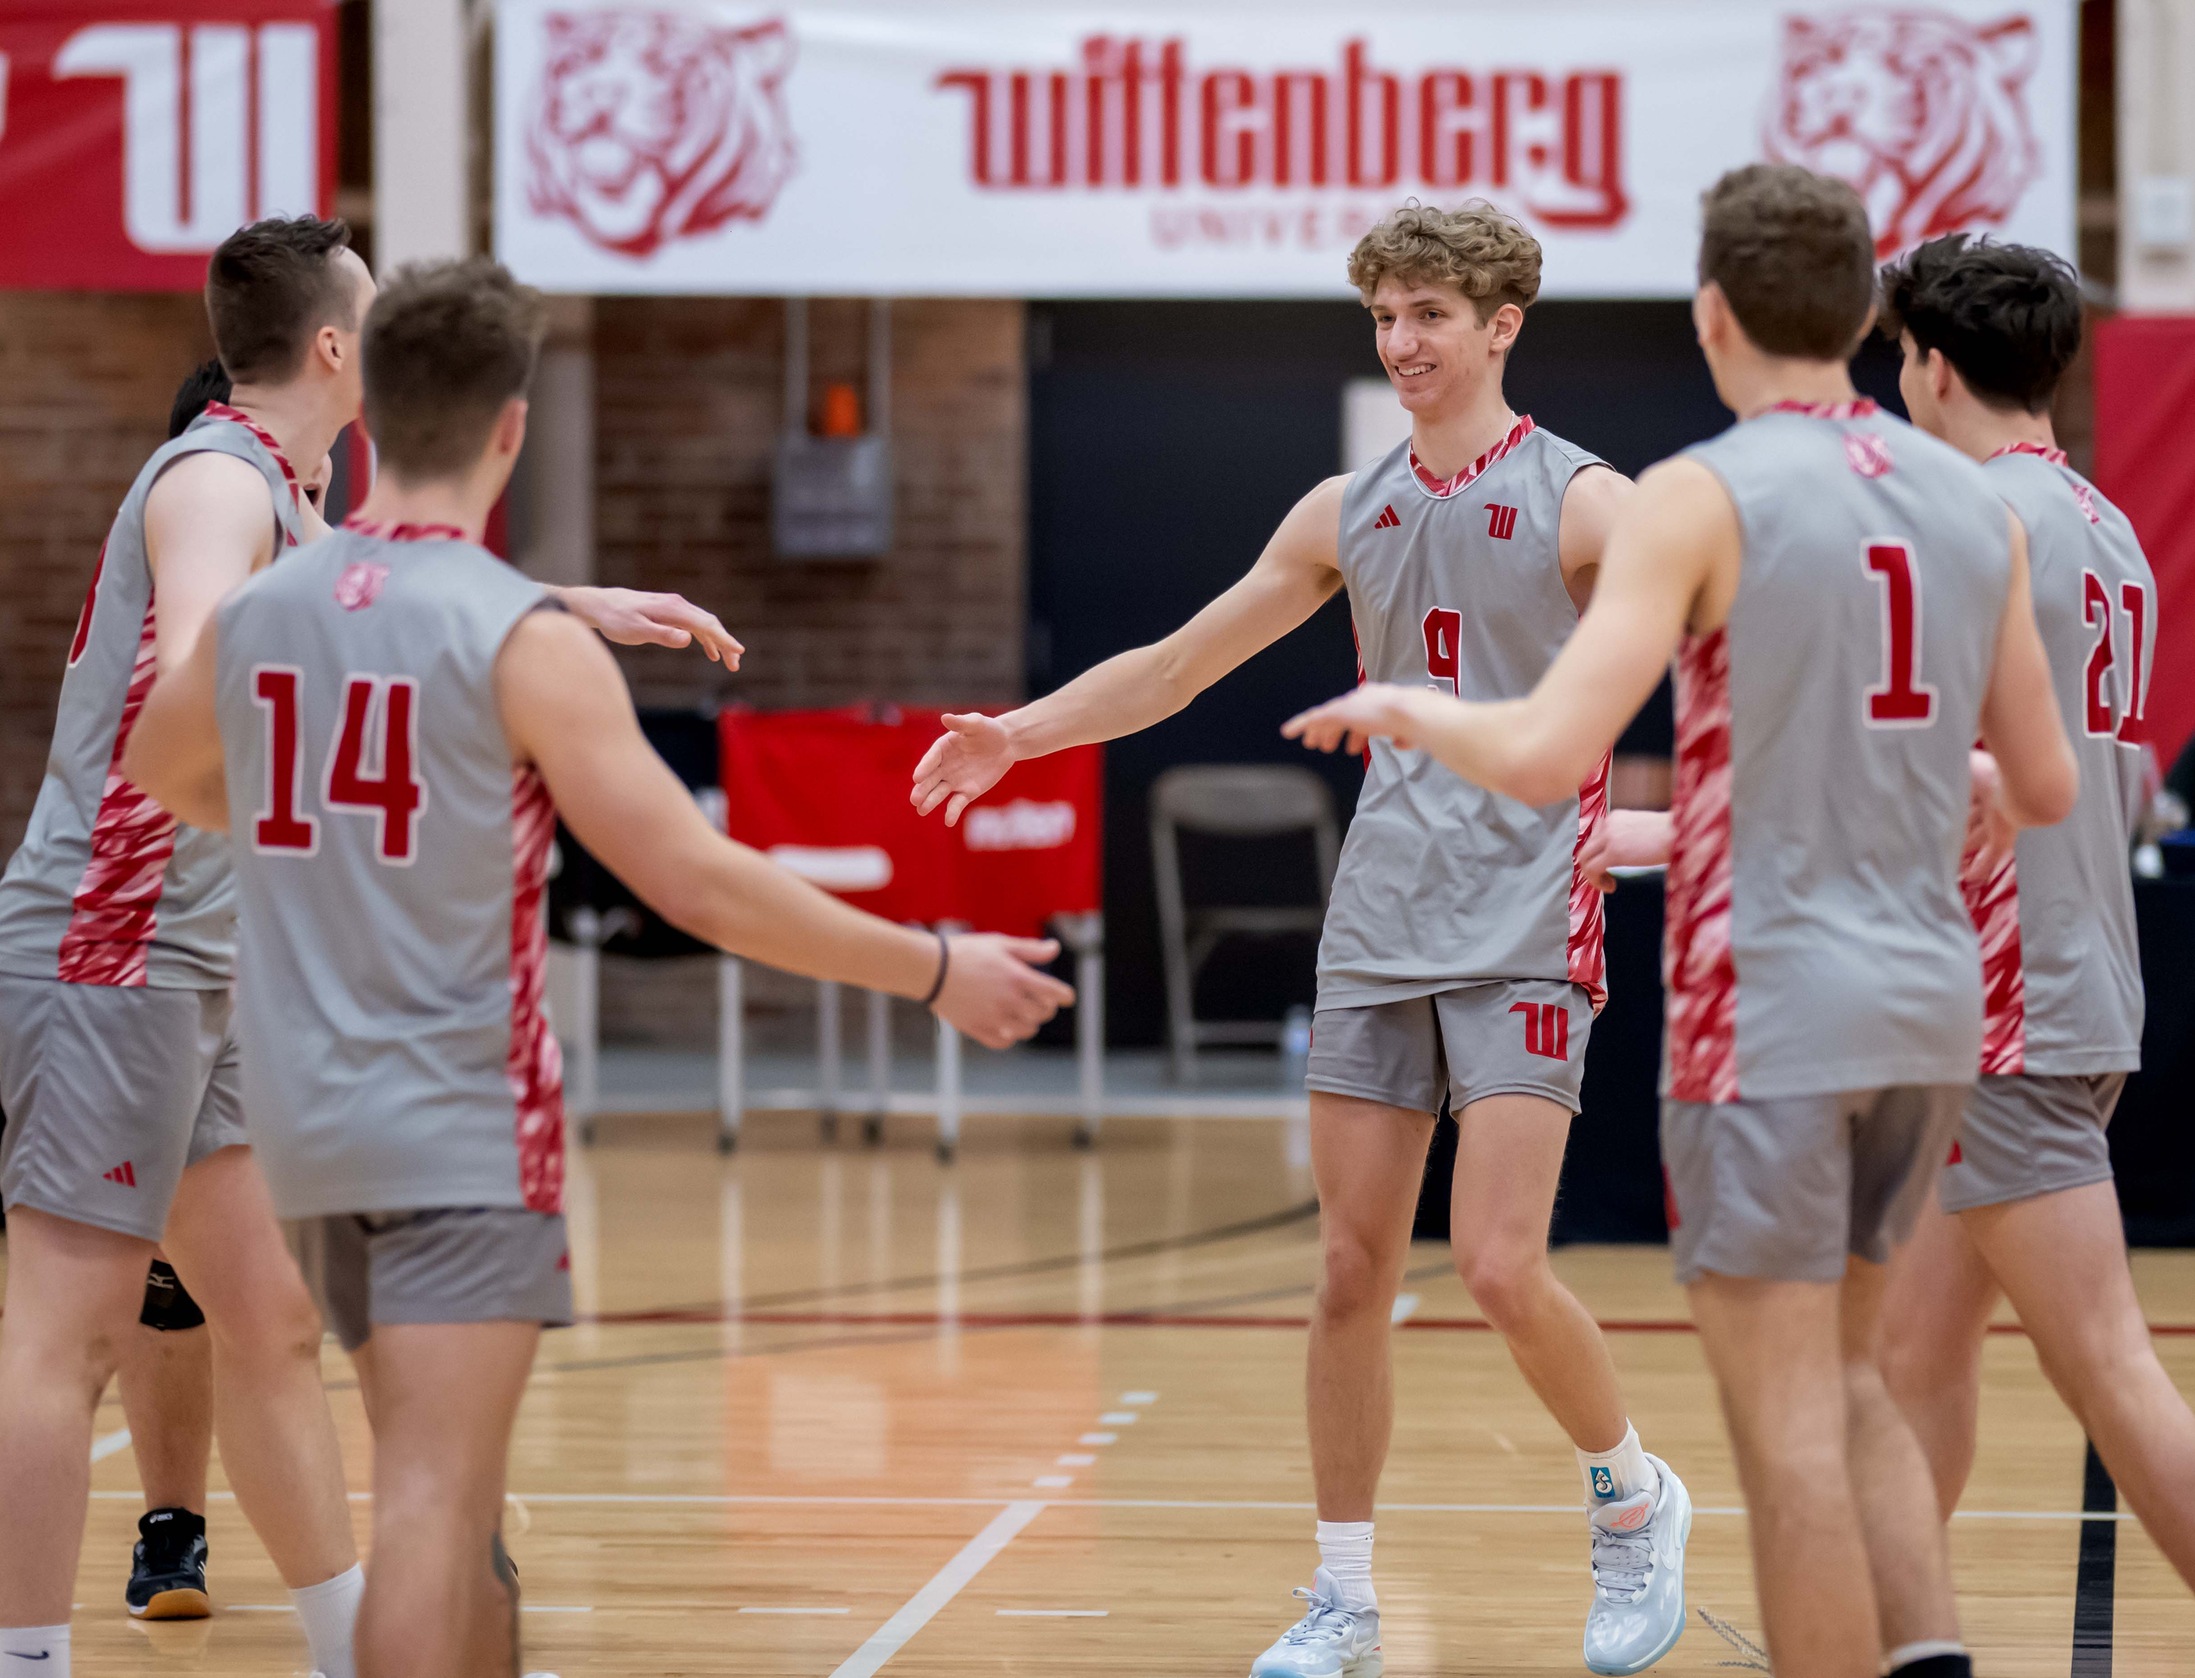 The Wittenberg men's volleyball team defeated Eastern Mennonite and Penn State Behrend on Saturday afternoon in Springfield. | Photo by John Coffman